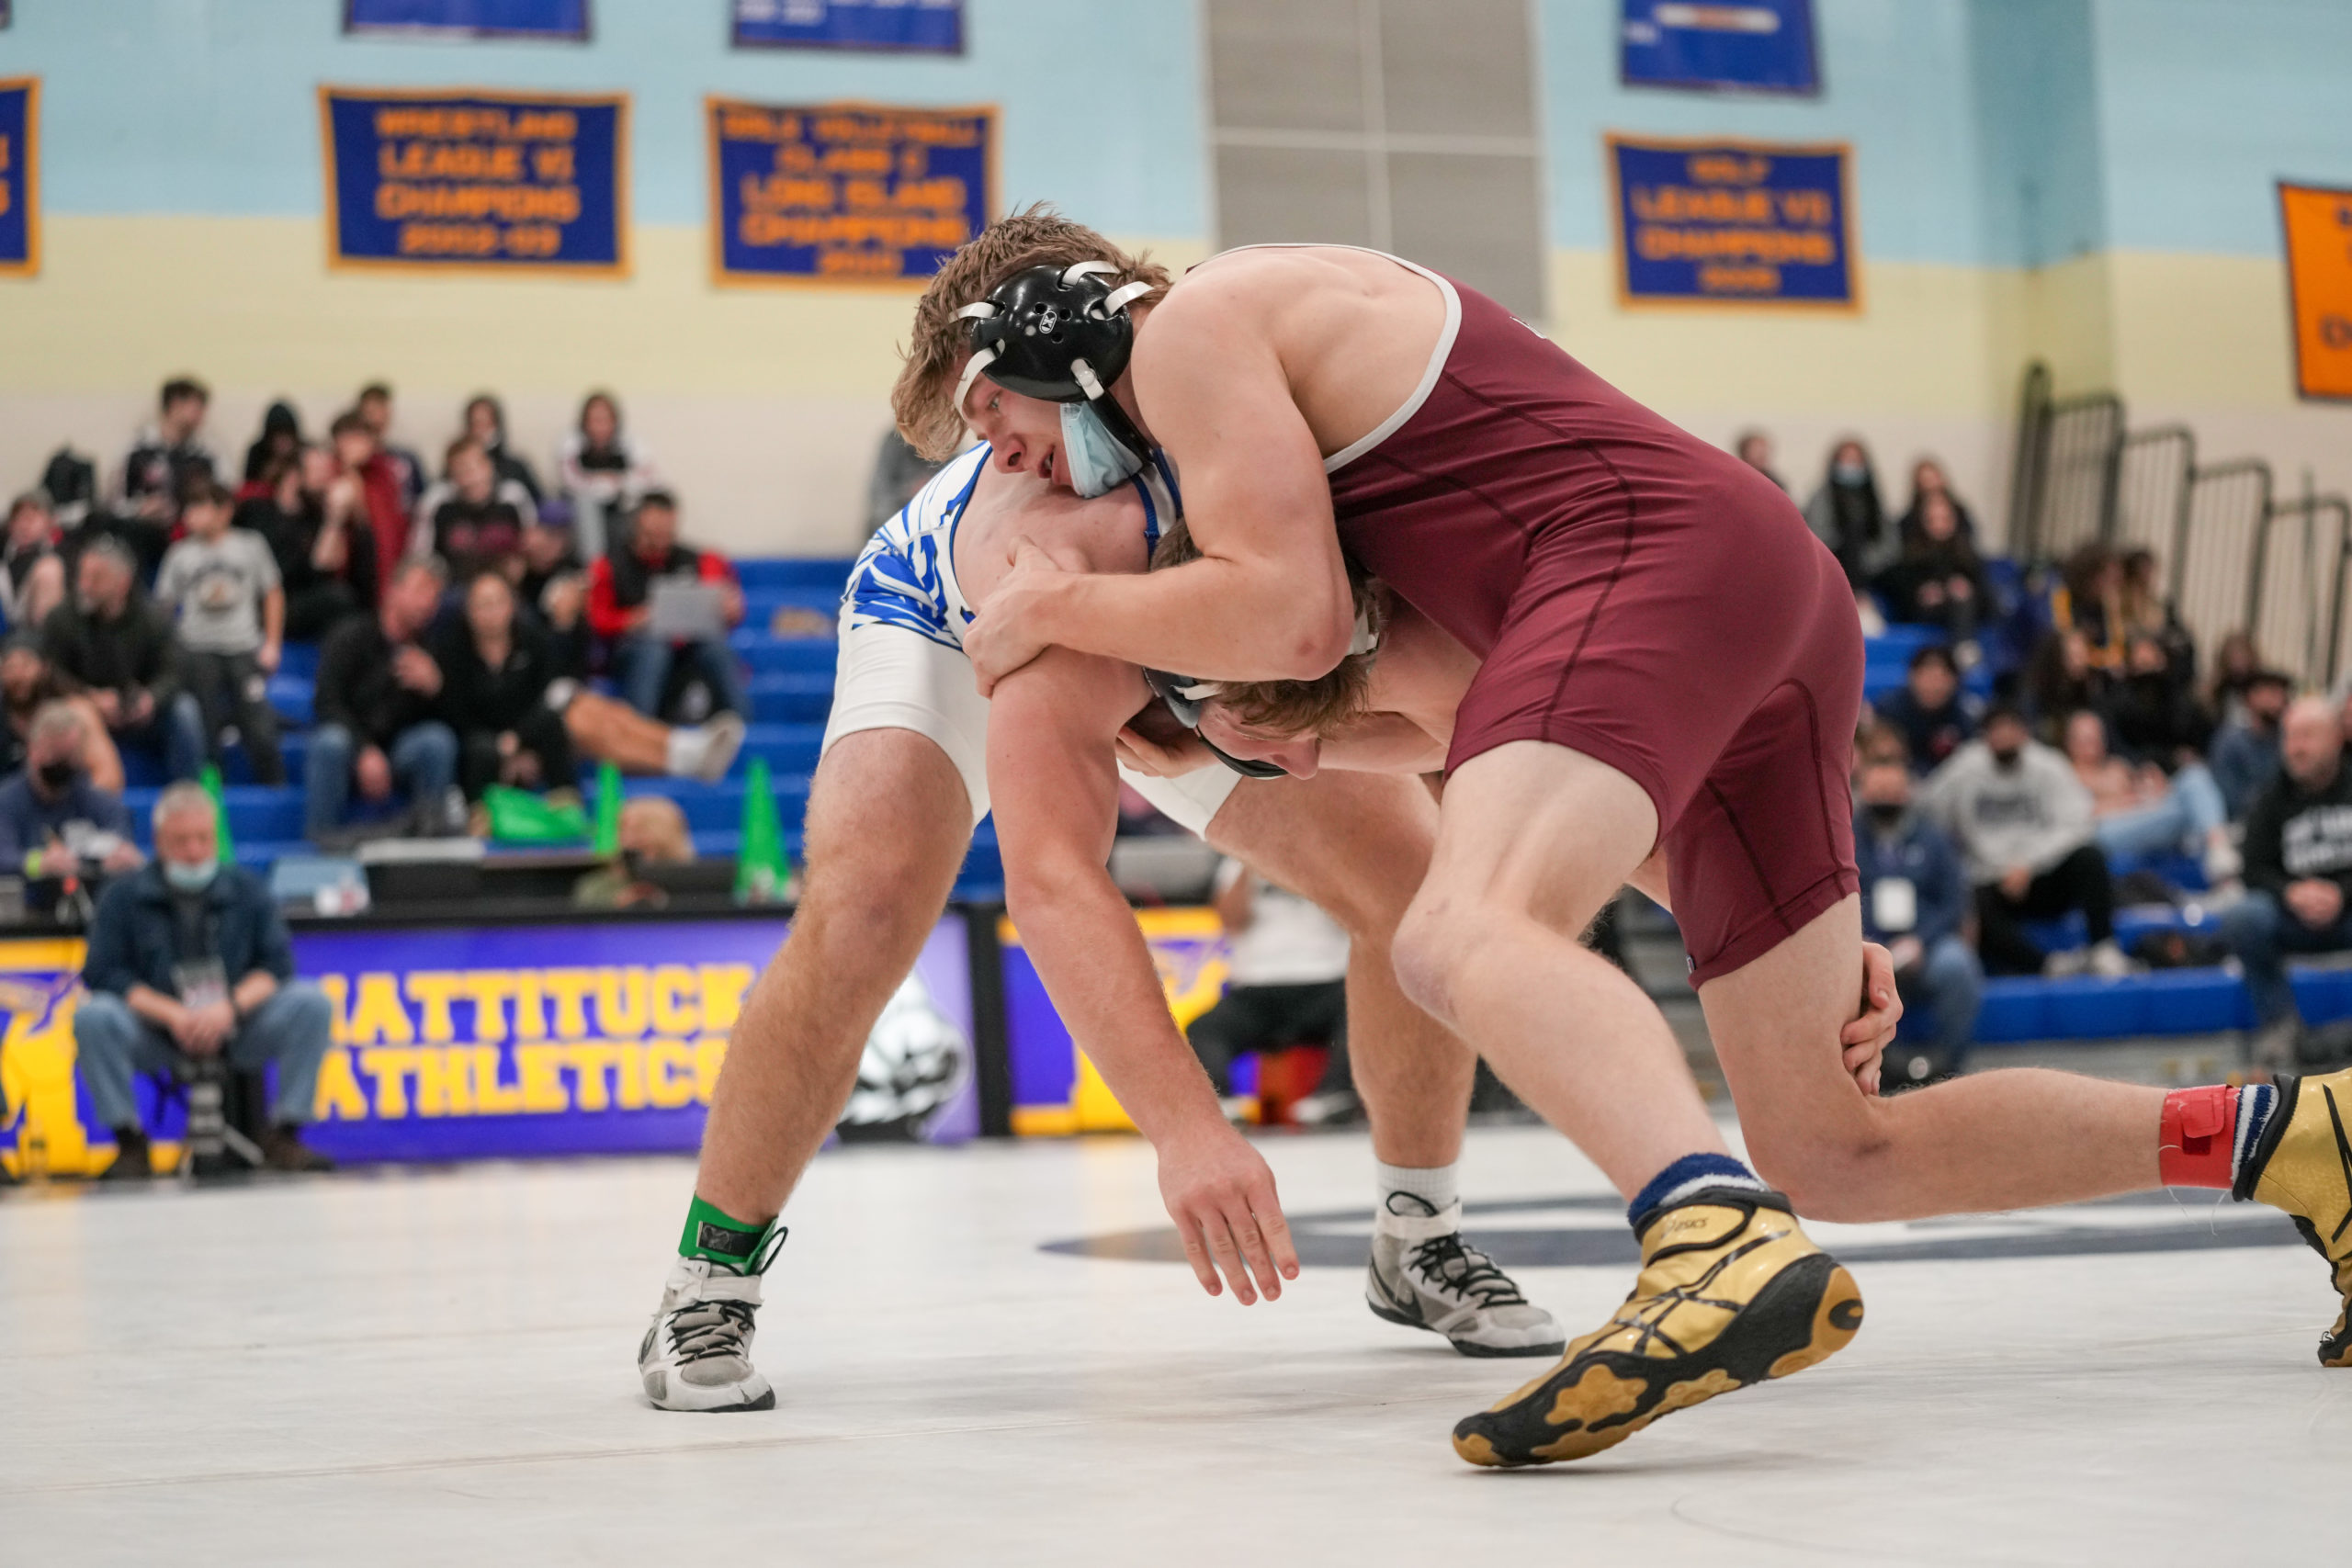 Senior Mariner Brad Bockhaus battles with Glenn's Alon Alkeali in the 189-pound county championship bout. Bockhaus won, 5-4, for his first ever county title.